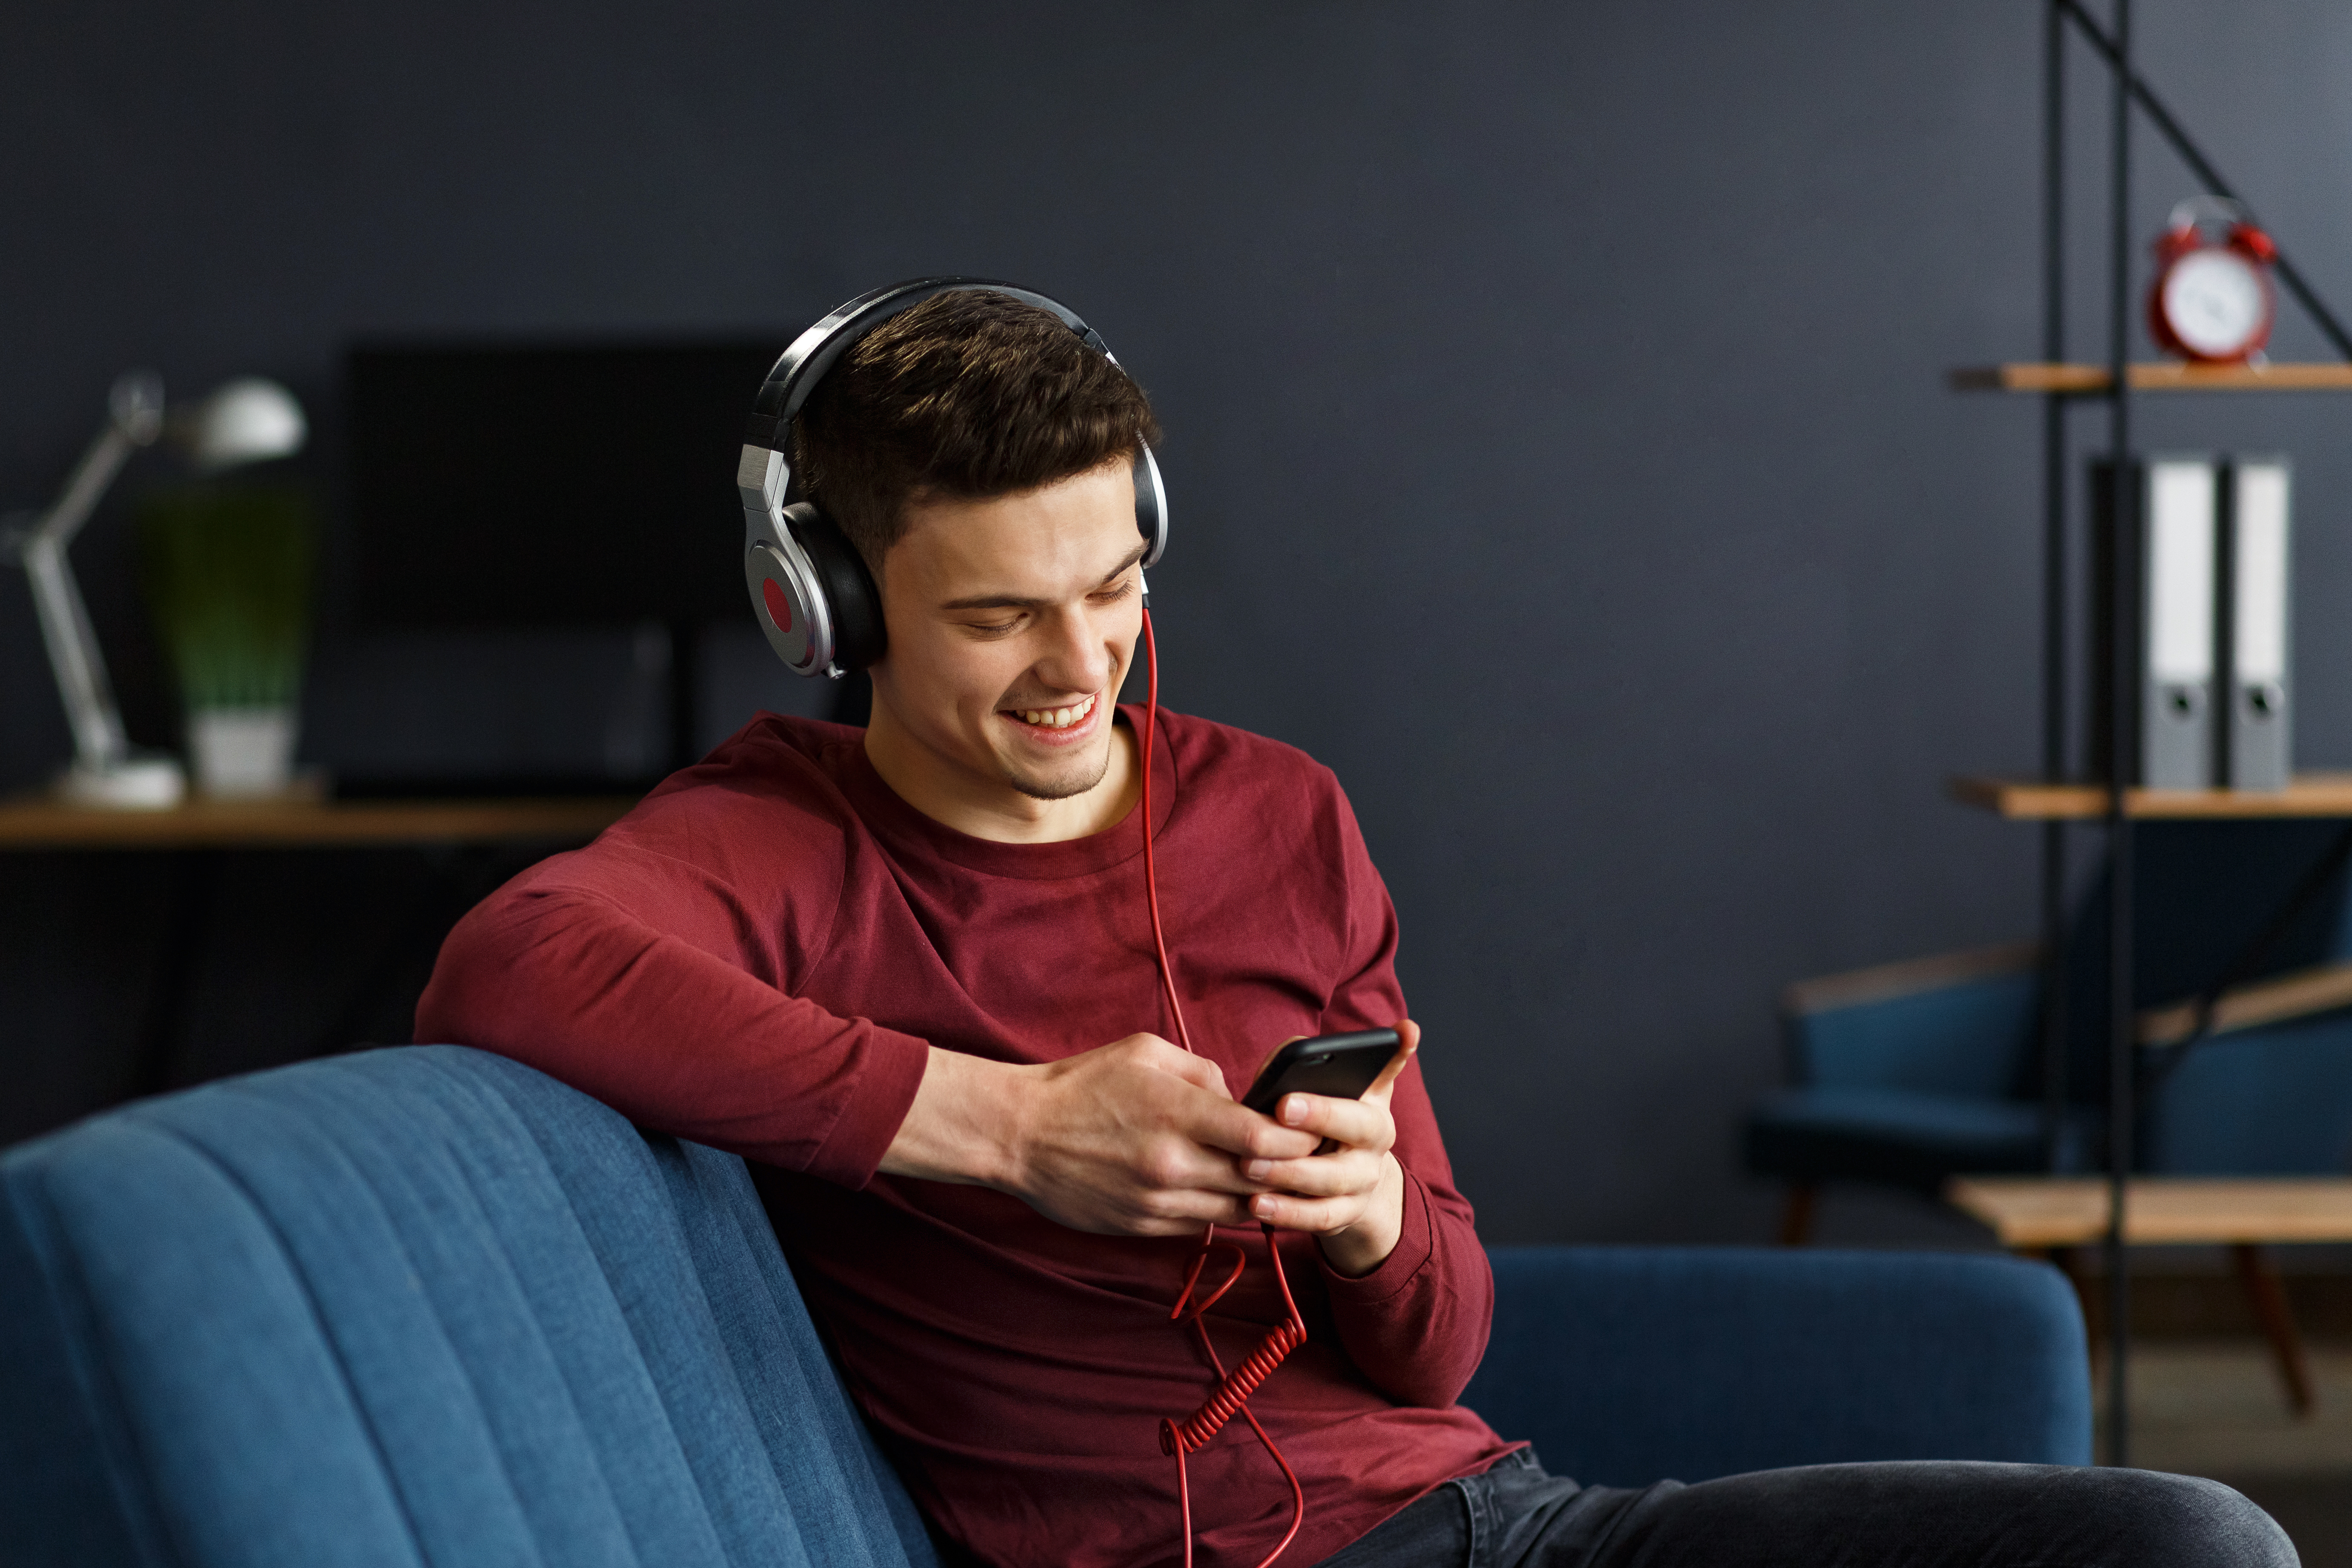 Man wearing a red shirt sitting on a couch listening to music with headphones on